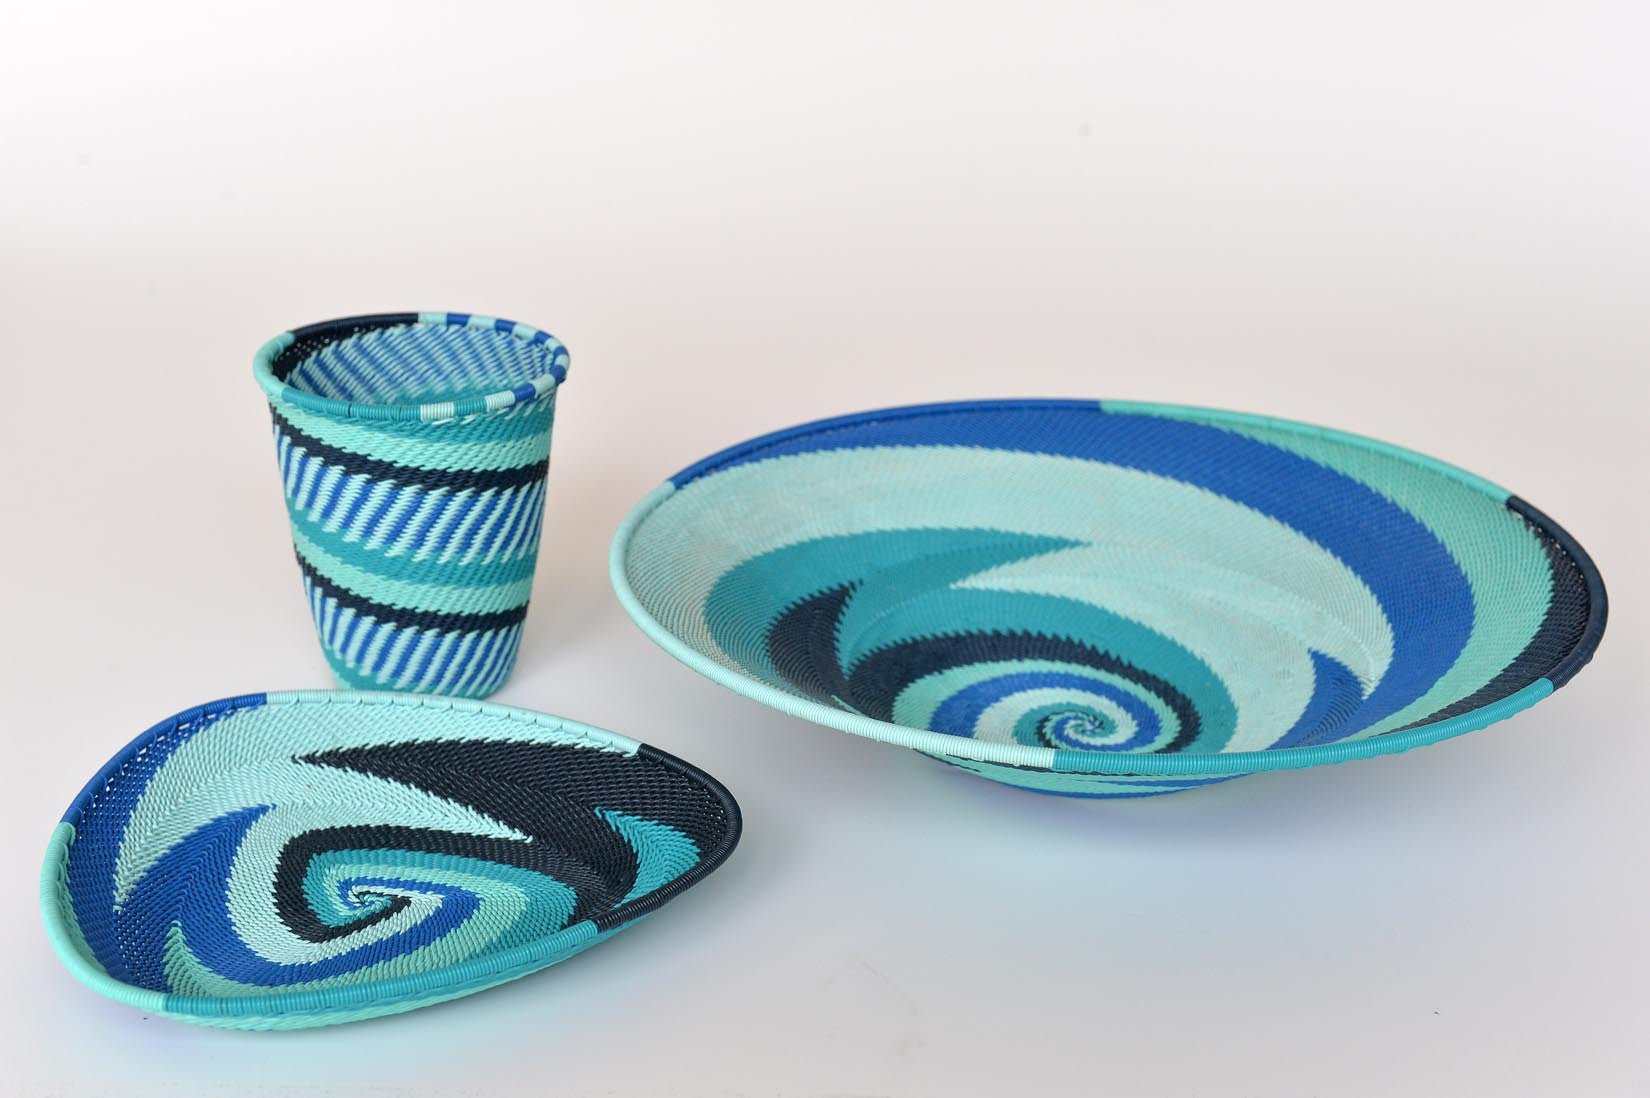 Zulu basket plates and cup - blues & turquoise - Natalia Willmott